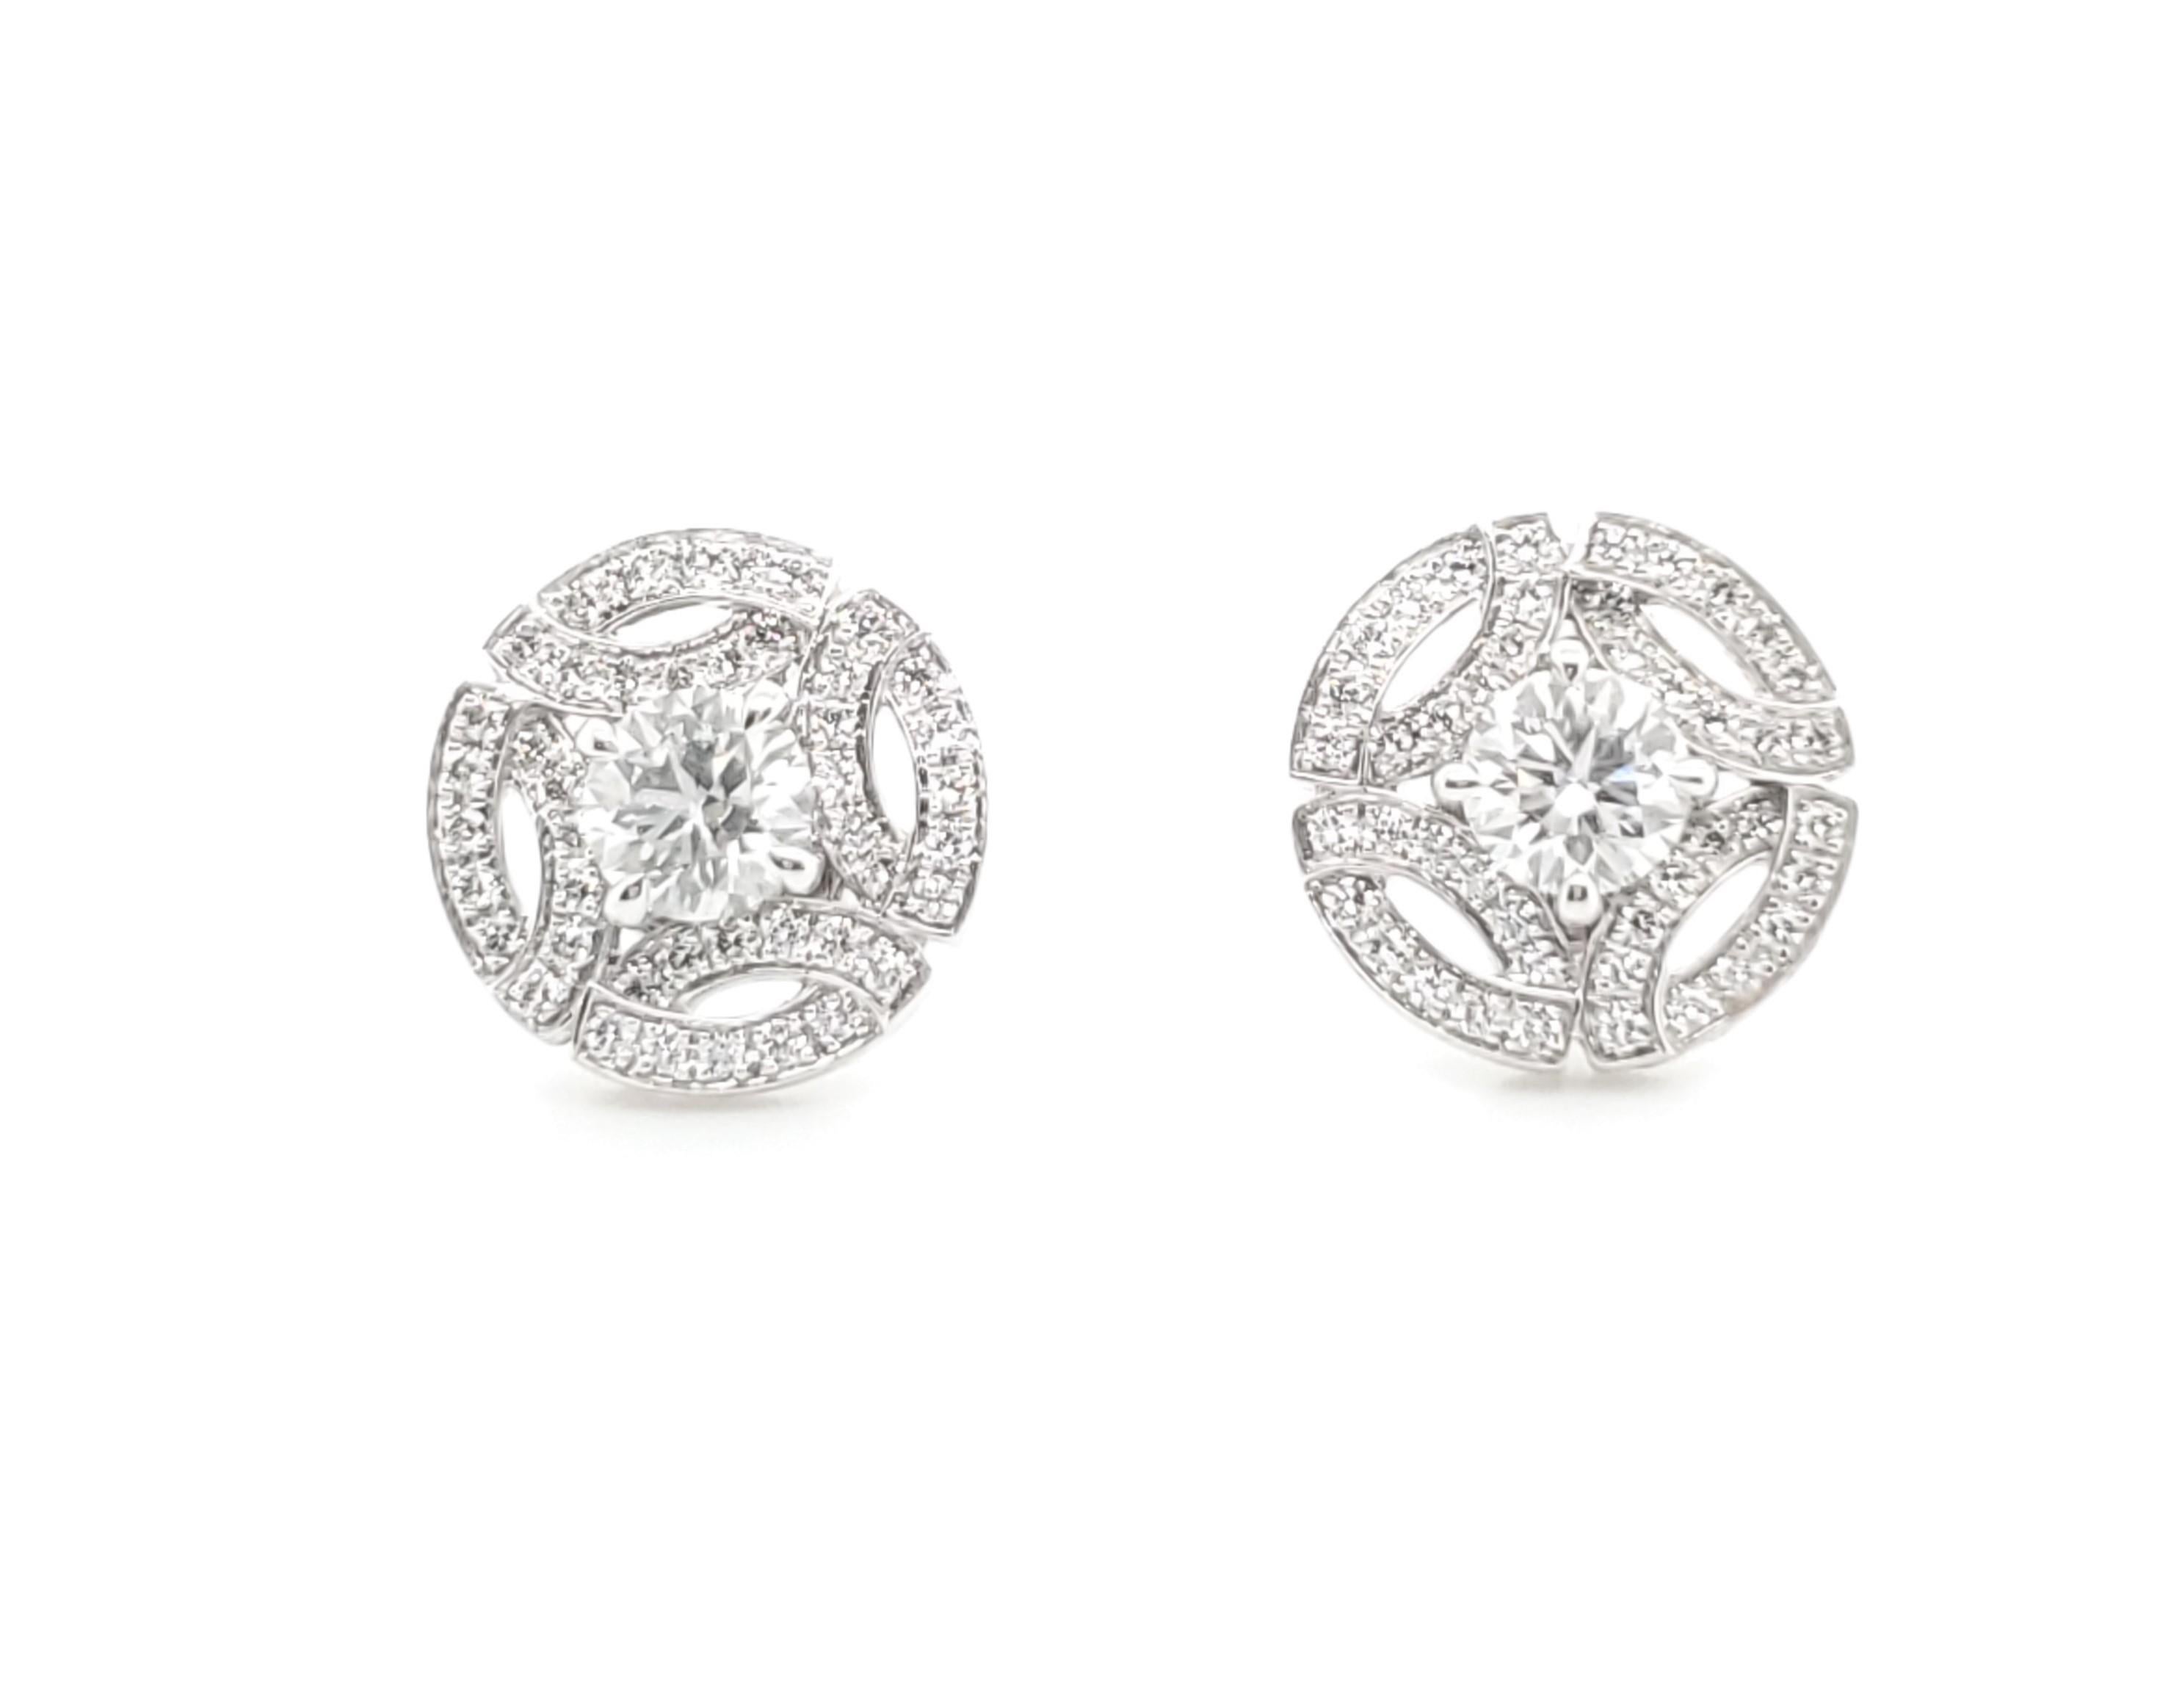 Authentic Cartier Earrings made with 18 karat white gold and diamonds.  Approximately 82 diamonds (D-E color, VVS1) with center stones weighing approximately .40 carats, surrounded by approximately .8 carats of pave diamonds.  CIRCA 2014. Stamped